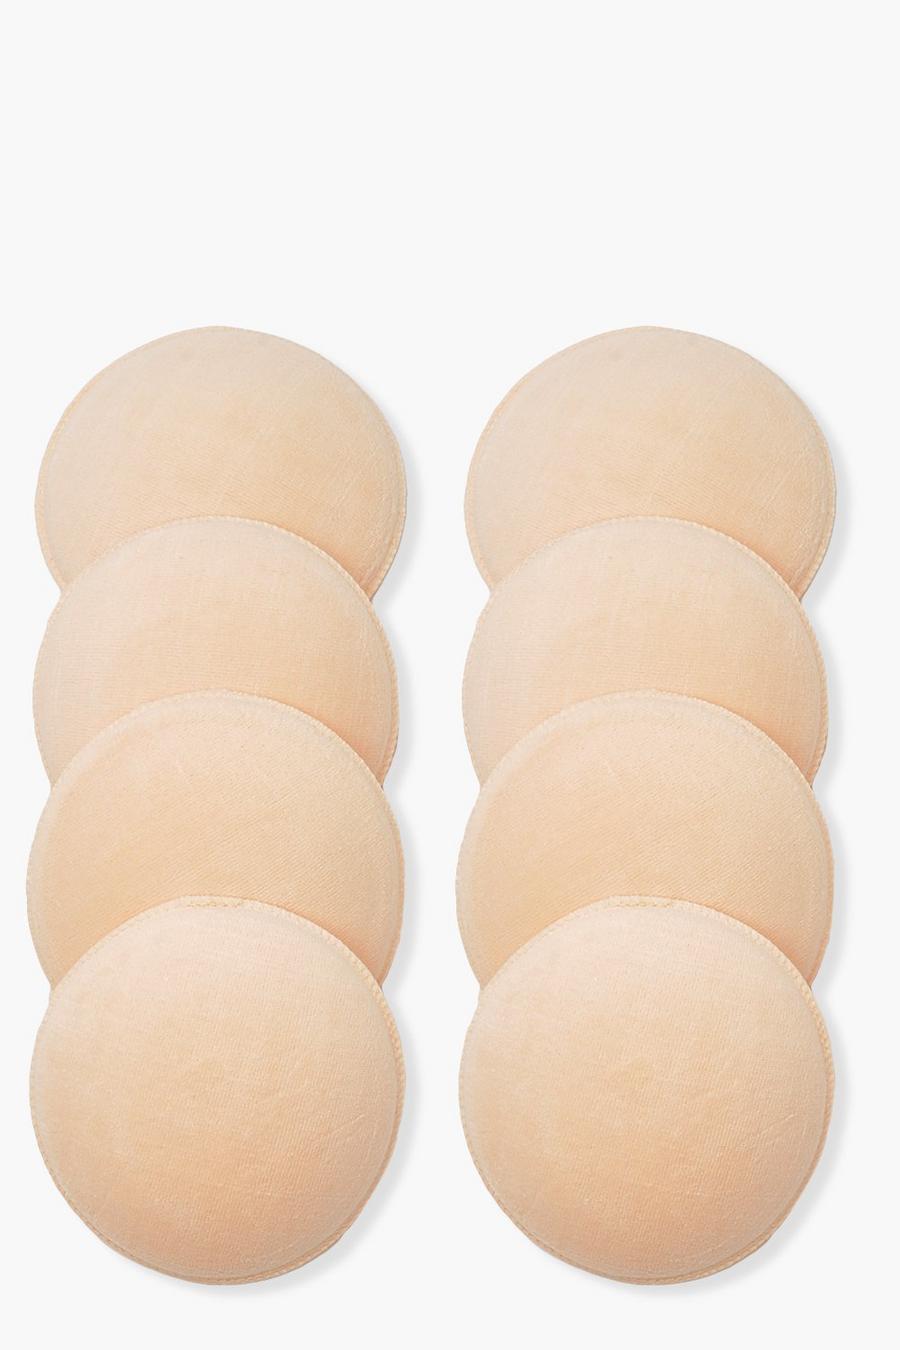 Nude Maternity 8pc Washable Anti-leak Breast Pads image number 1